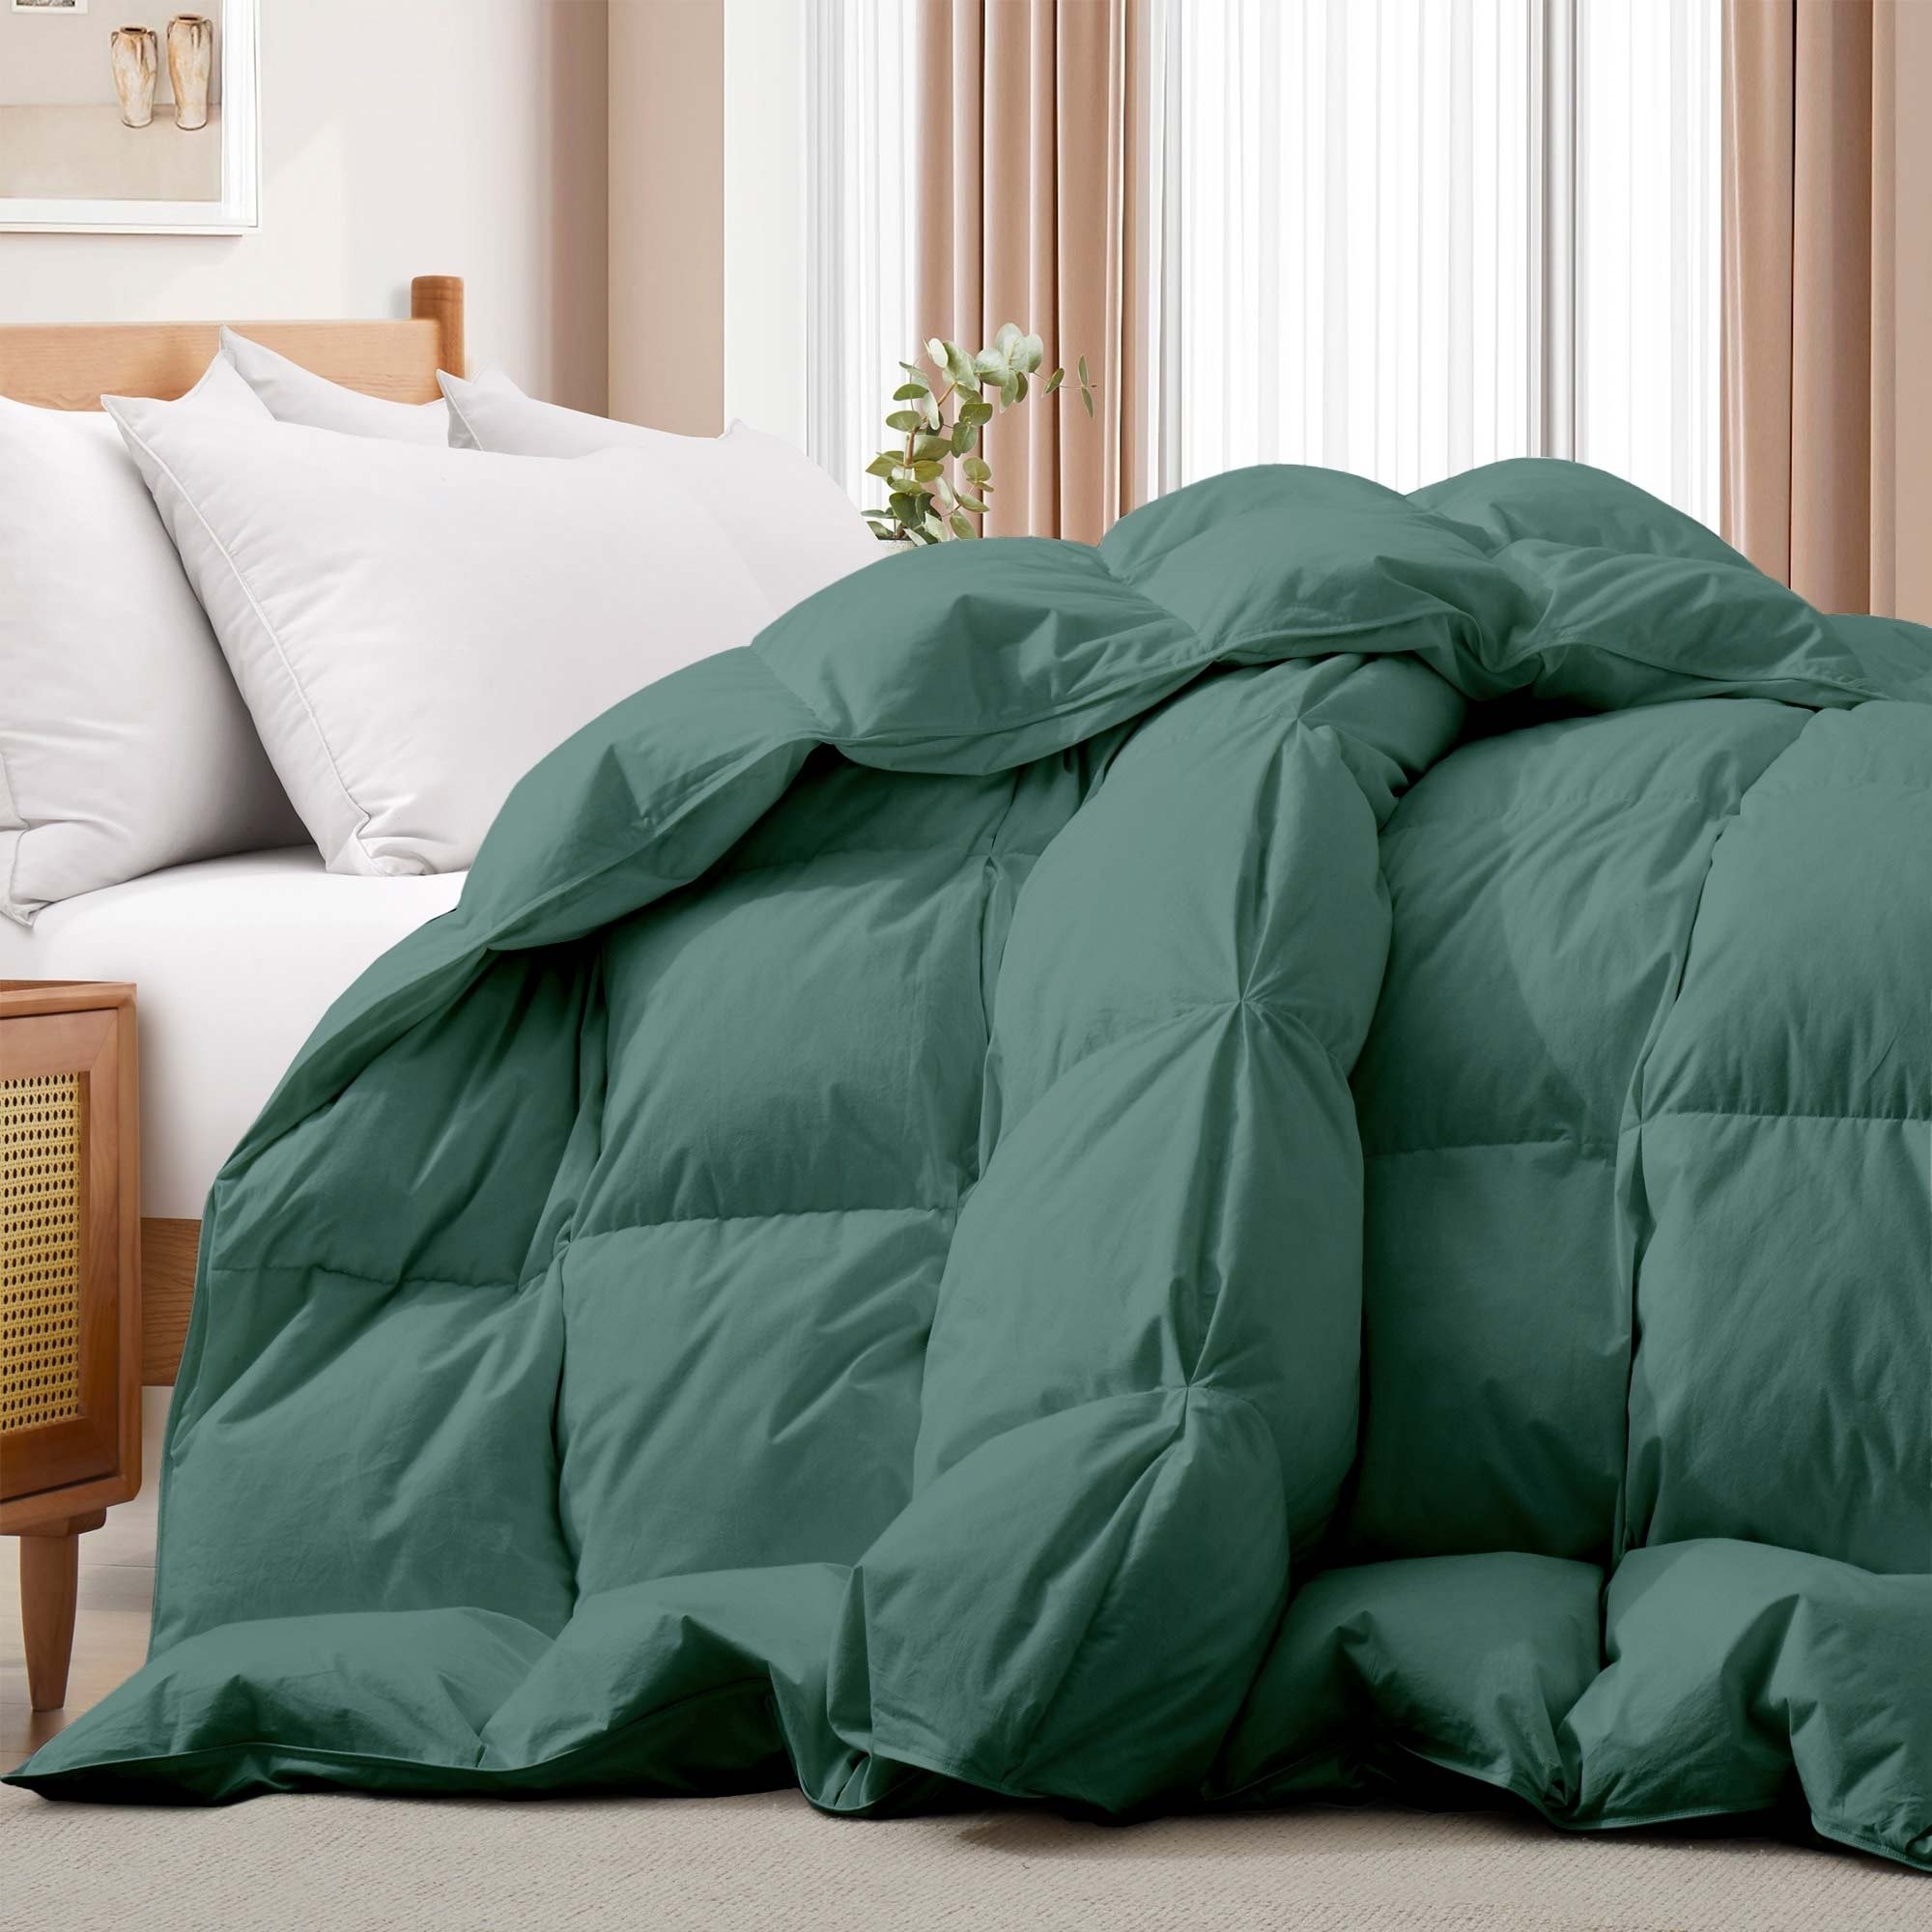 All Seasons Pinch Pleat Goose Feather And Down Comforter-Breathable Cotton Fabric Baffled Box Duvet Insert - Smoke Pine, Twin